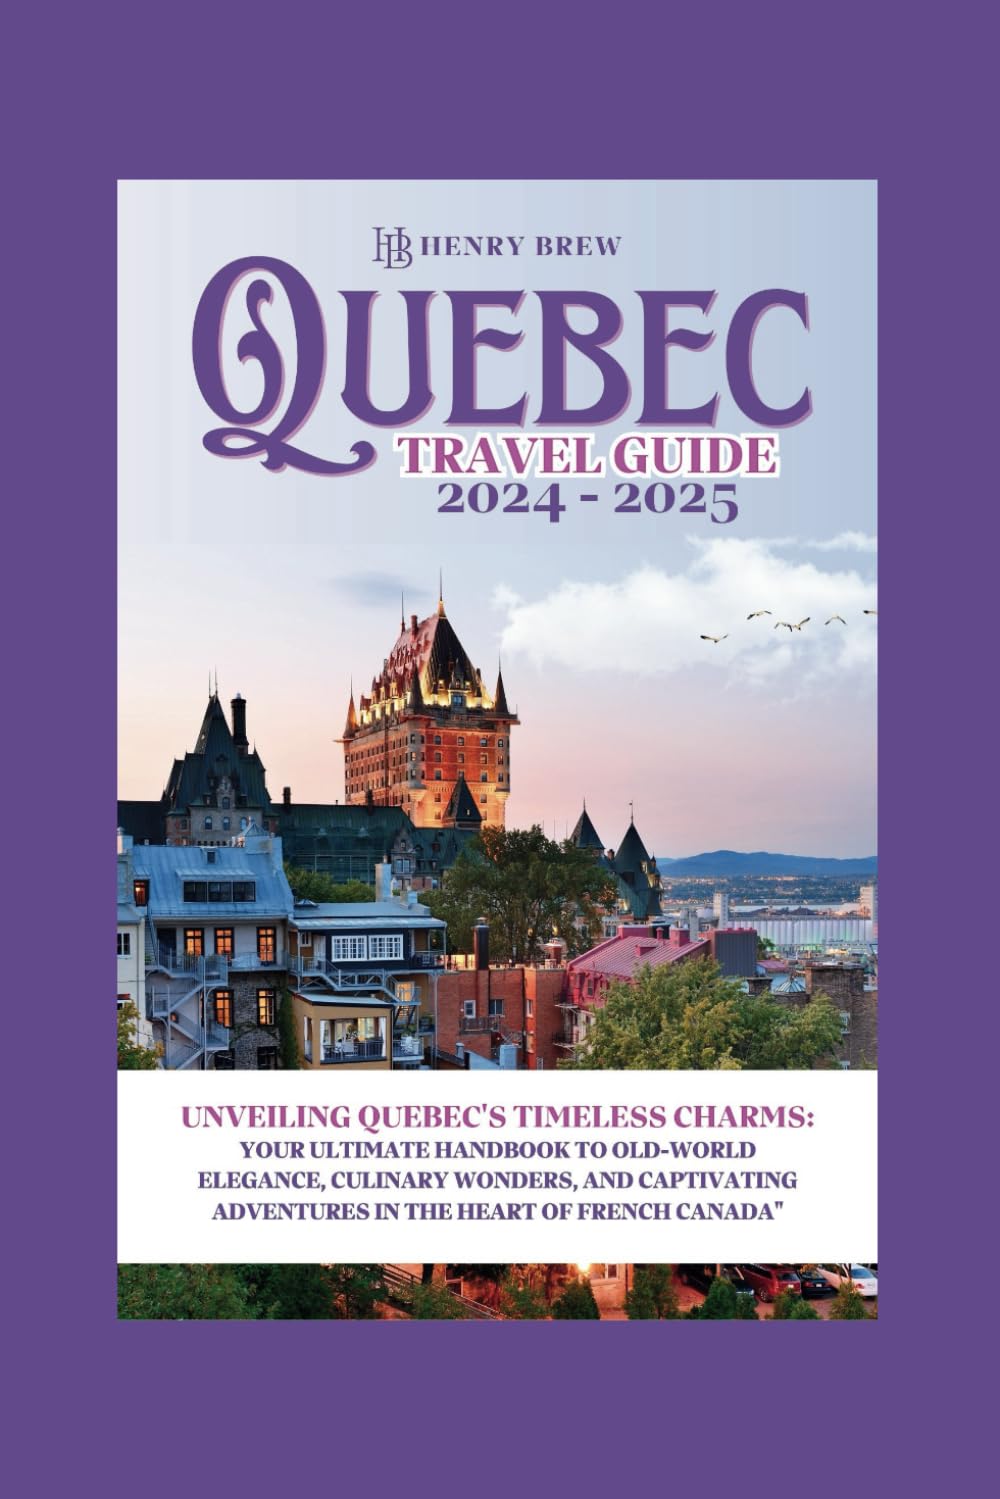 Quebec city travel guide 2024-2025: The guide provides an in-depth exploration of Quebec's timeless charms, including its old-world elegance, culinary ... French Canada (Adventure & Fun Awaits Series)